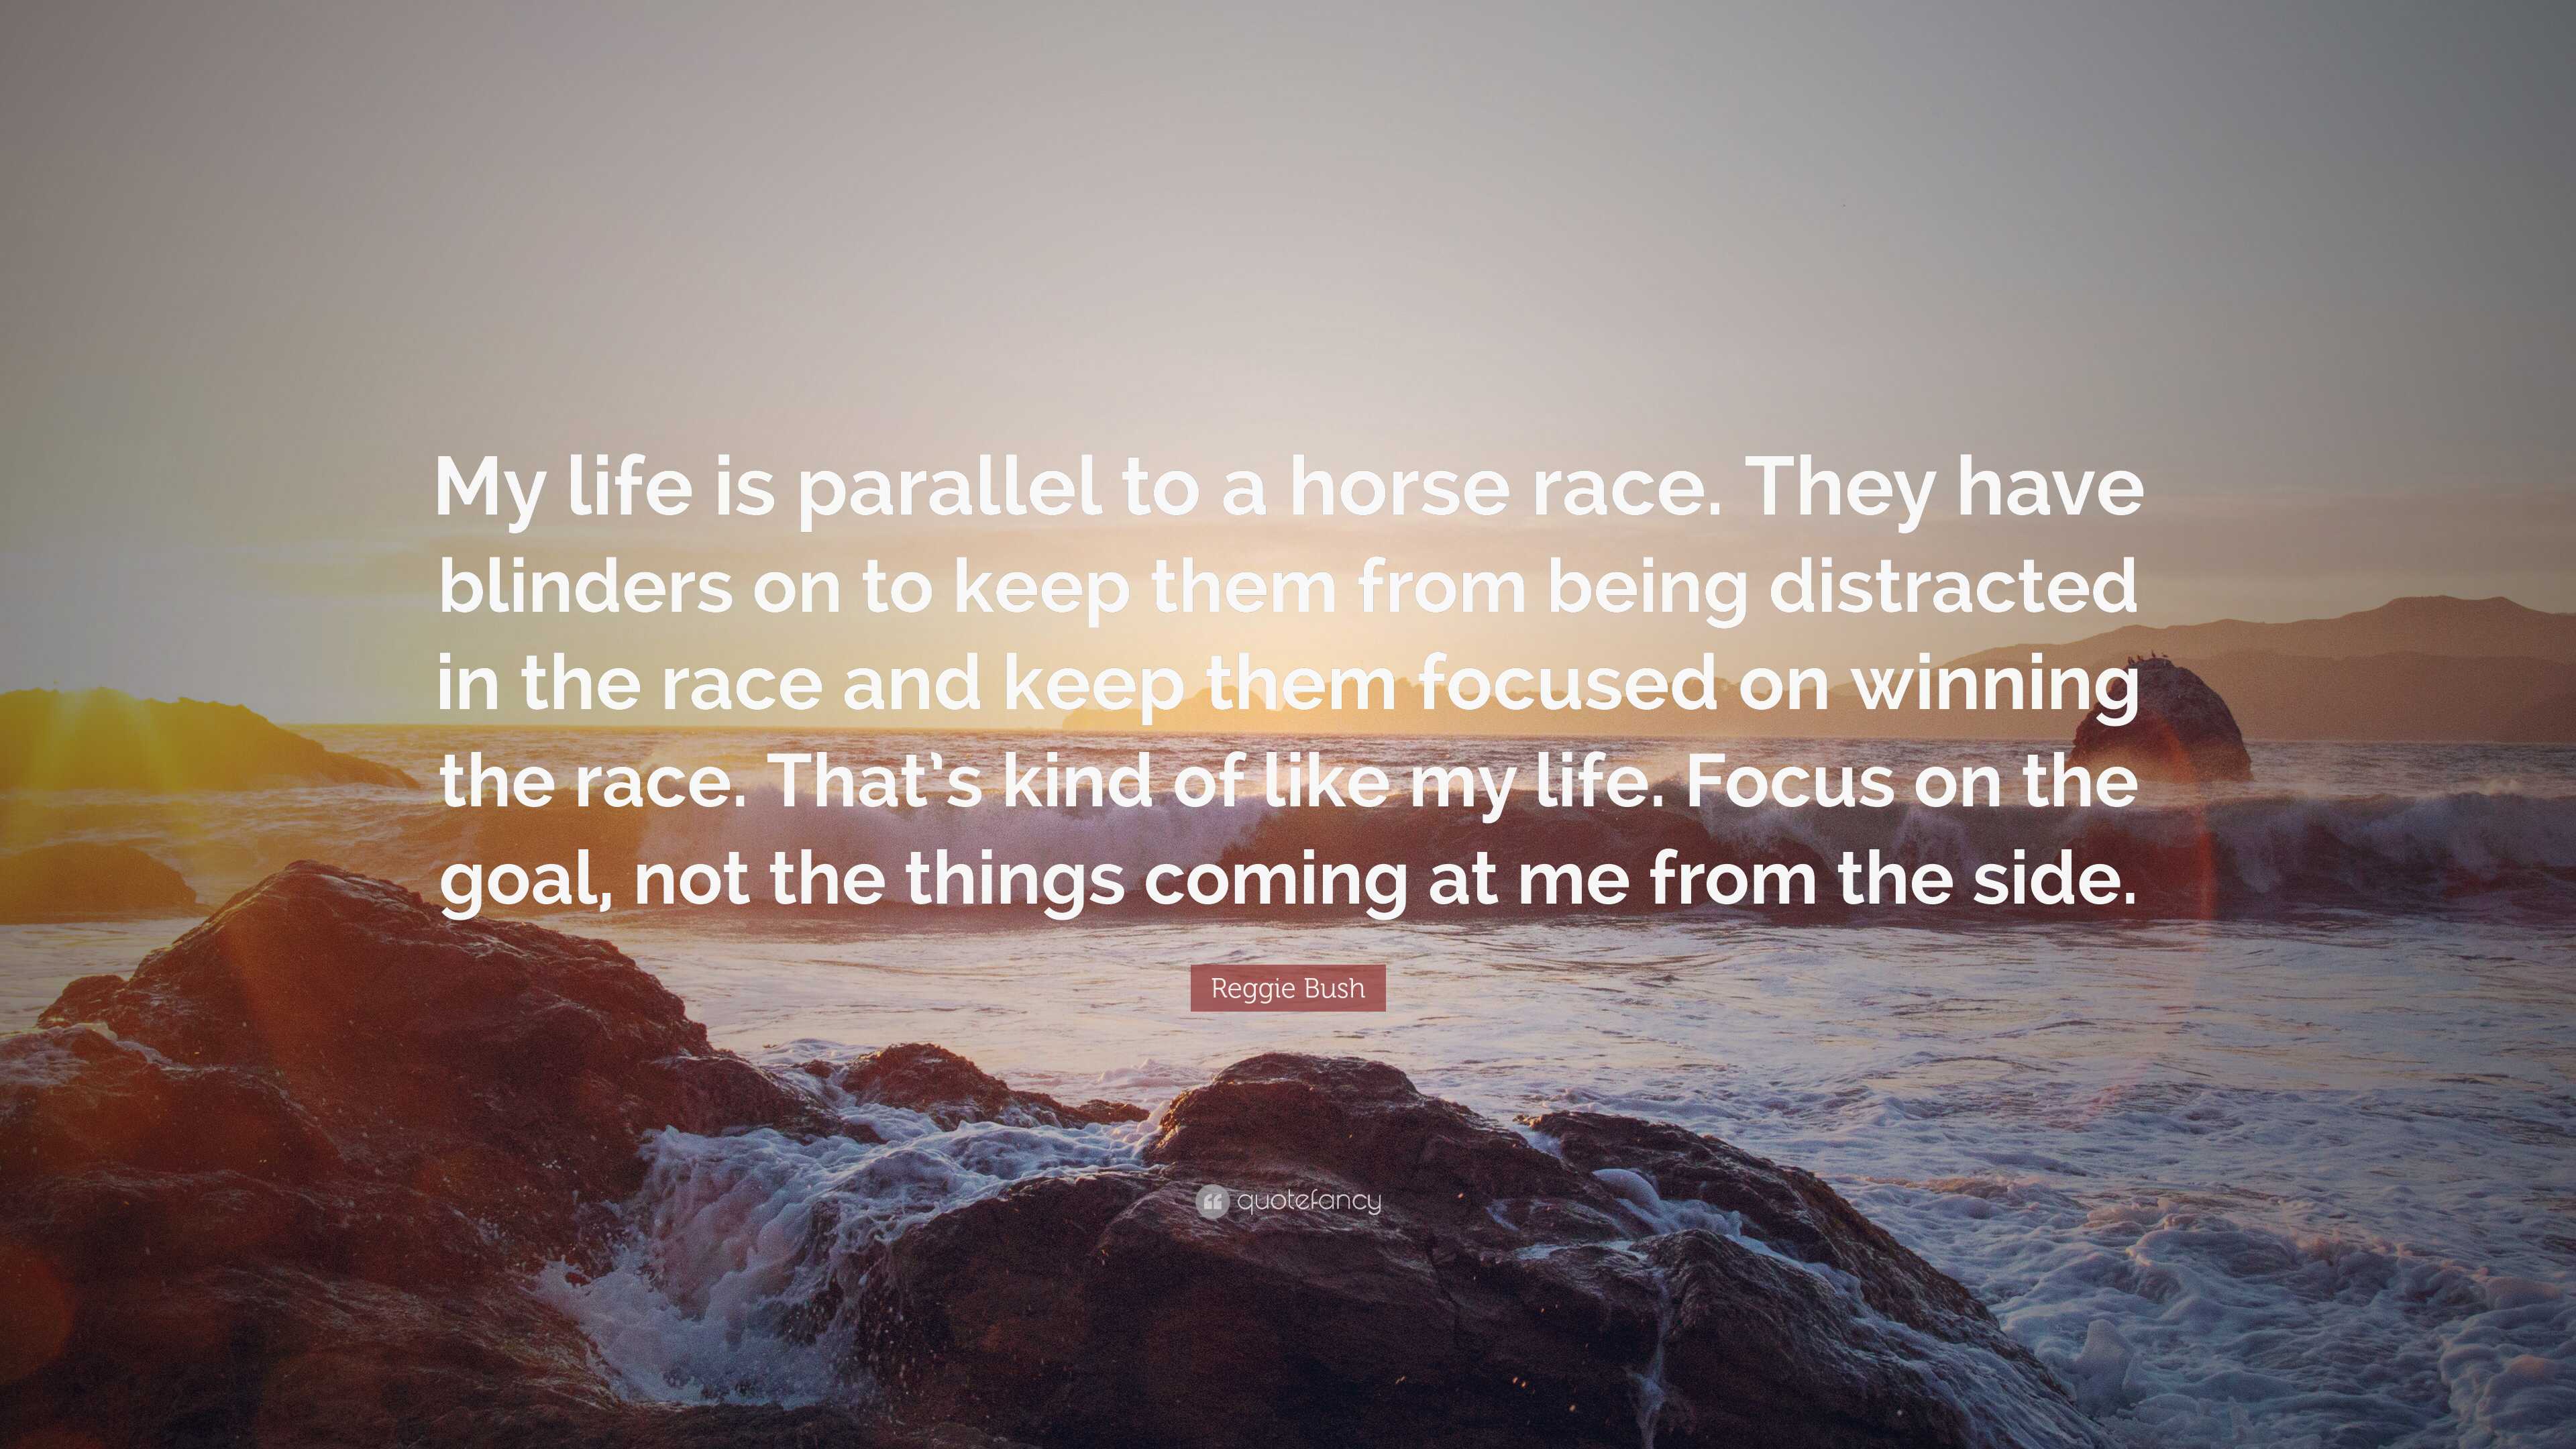 Reggie Bush Quote: “My life is parallel to a horse race. They have ...